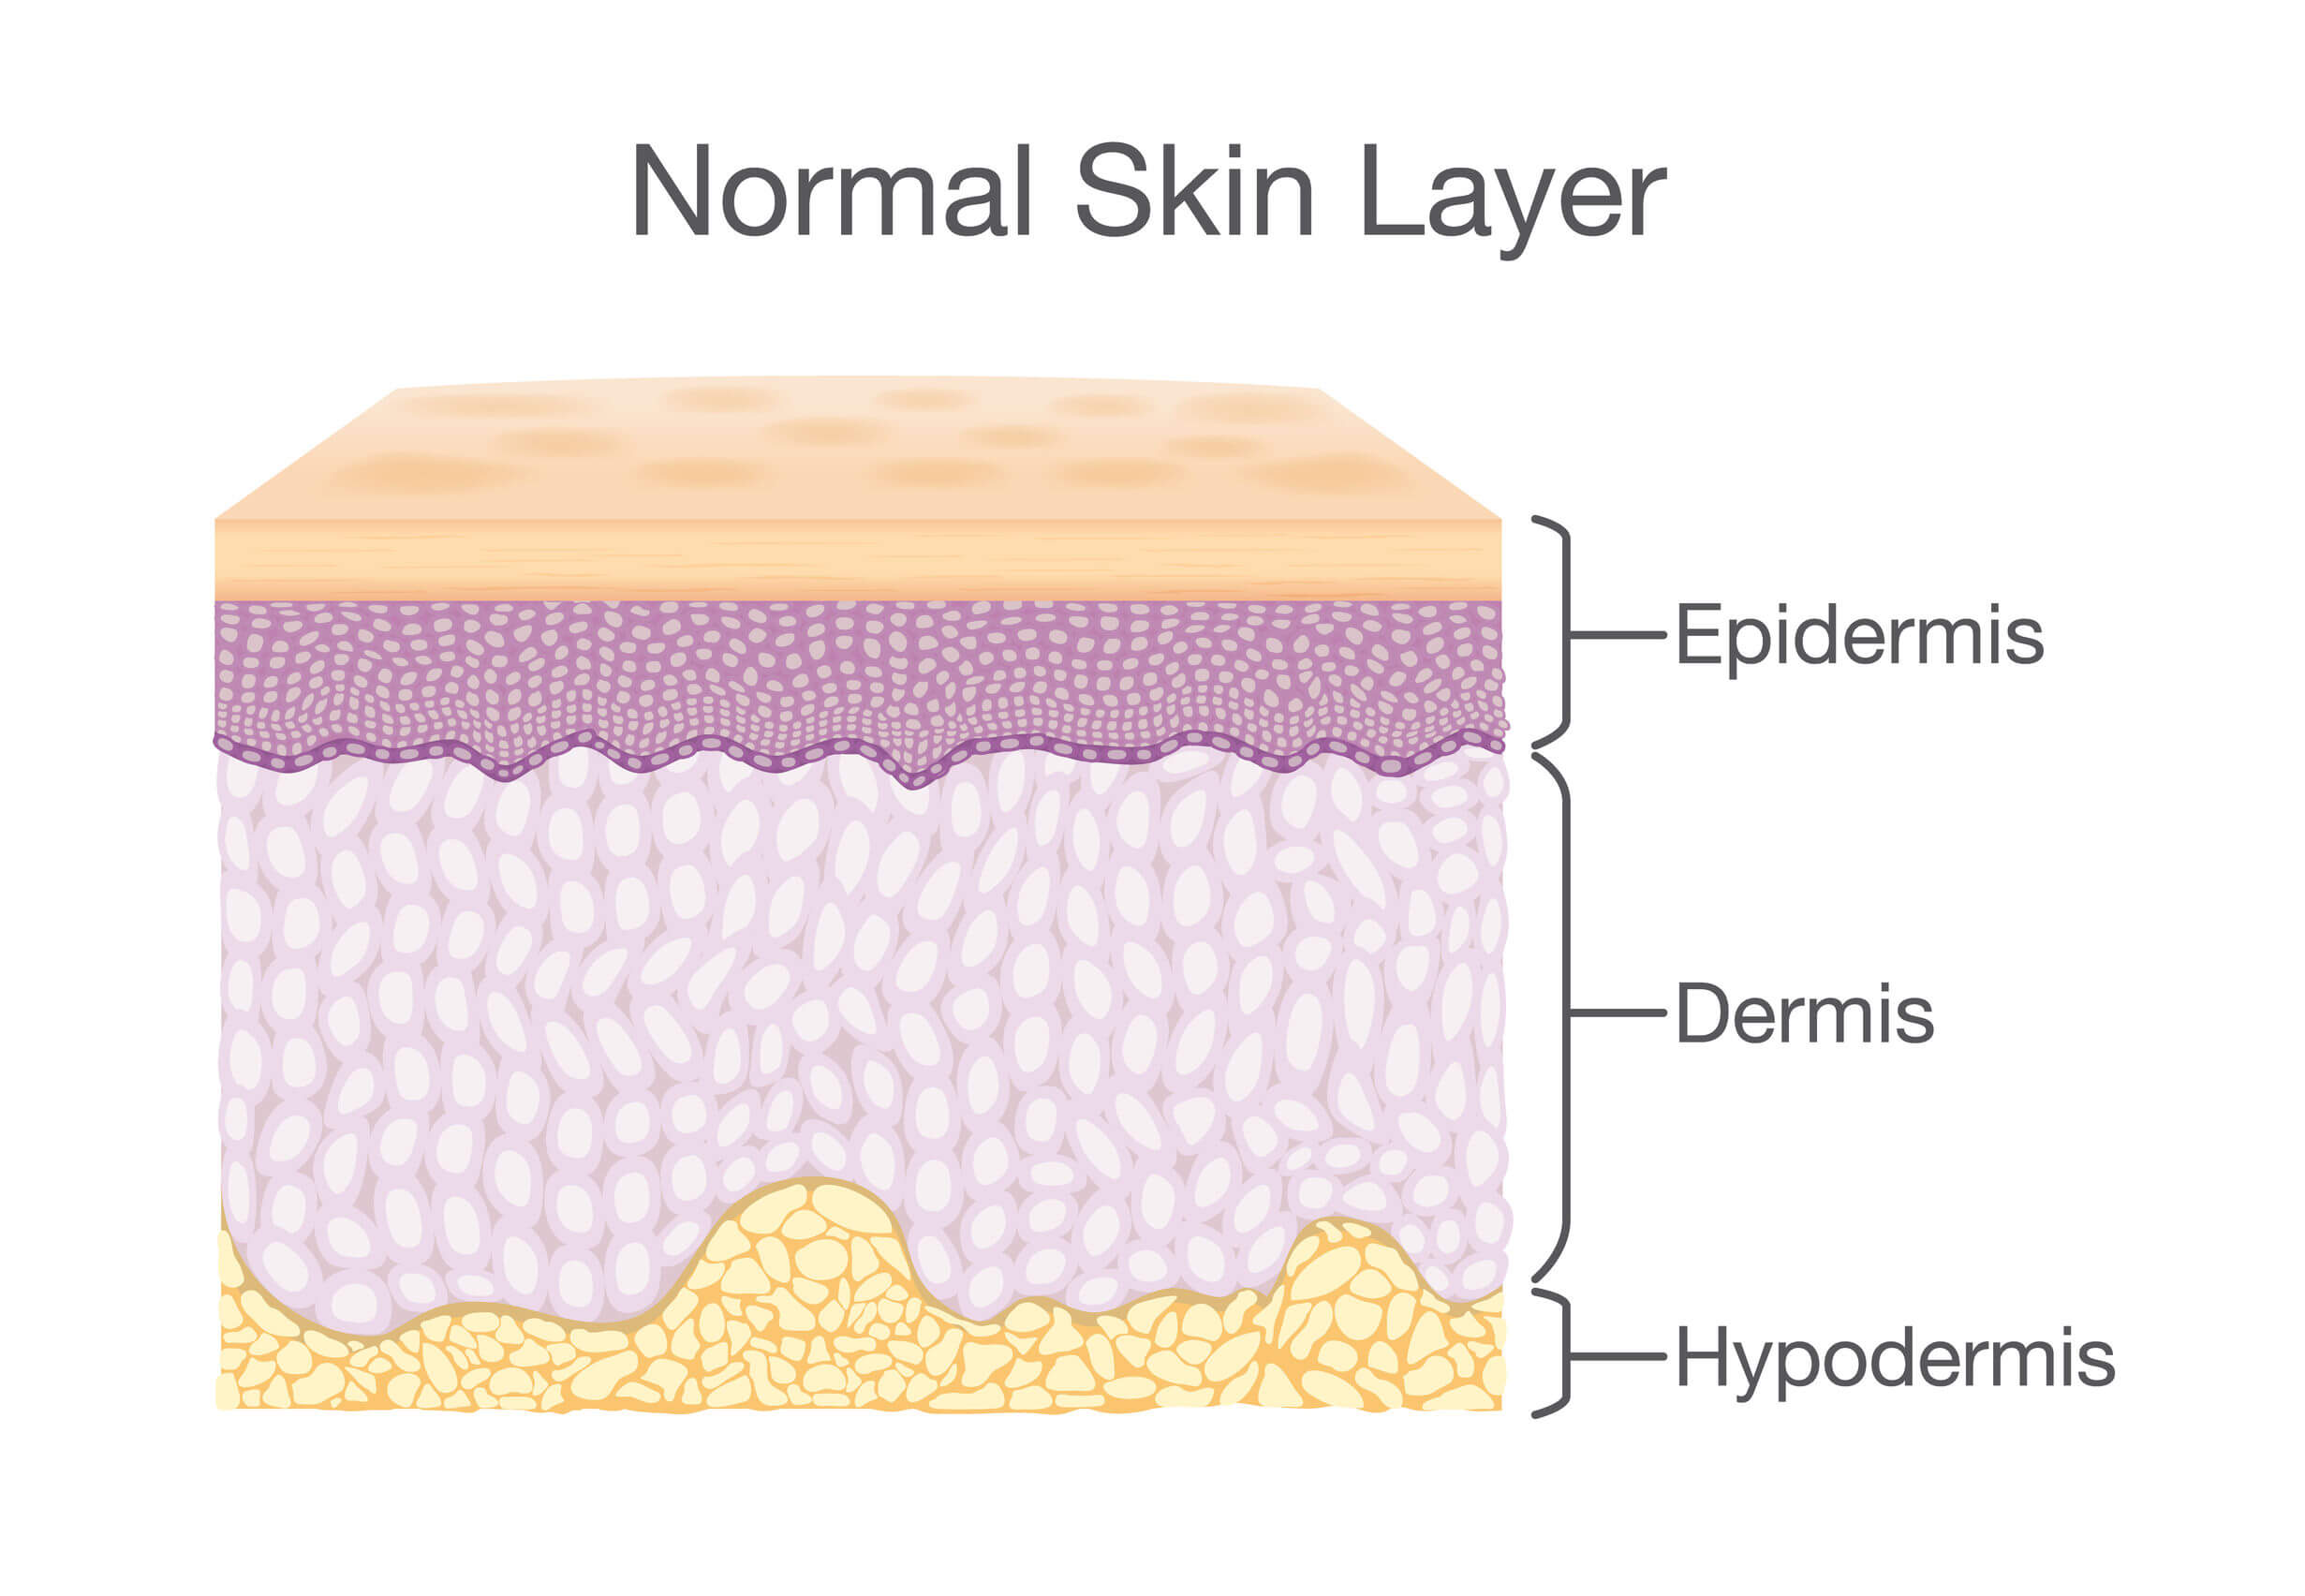 The effects of weather on the skin are complex.